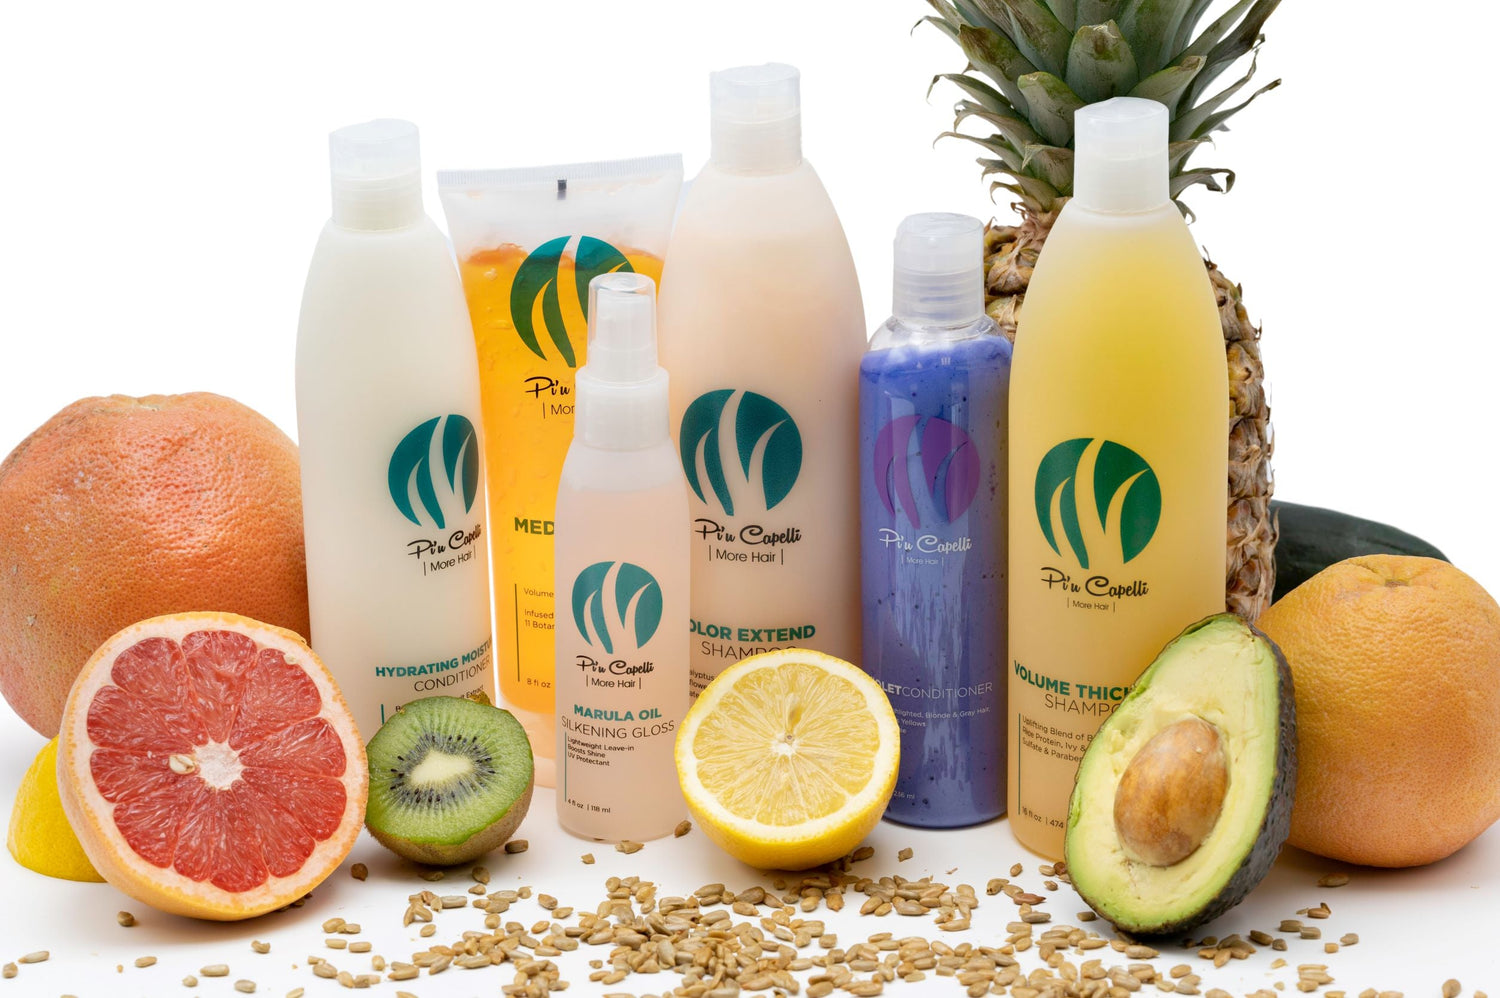 Piu Capelli natural gentle shampoos and conditioners for people who wear hair systems including dermal lens.